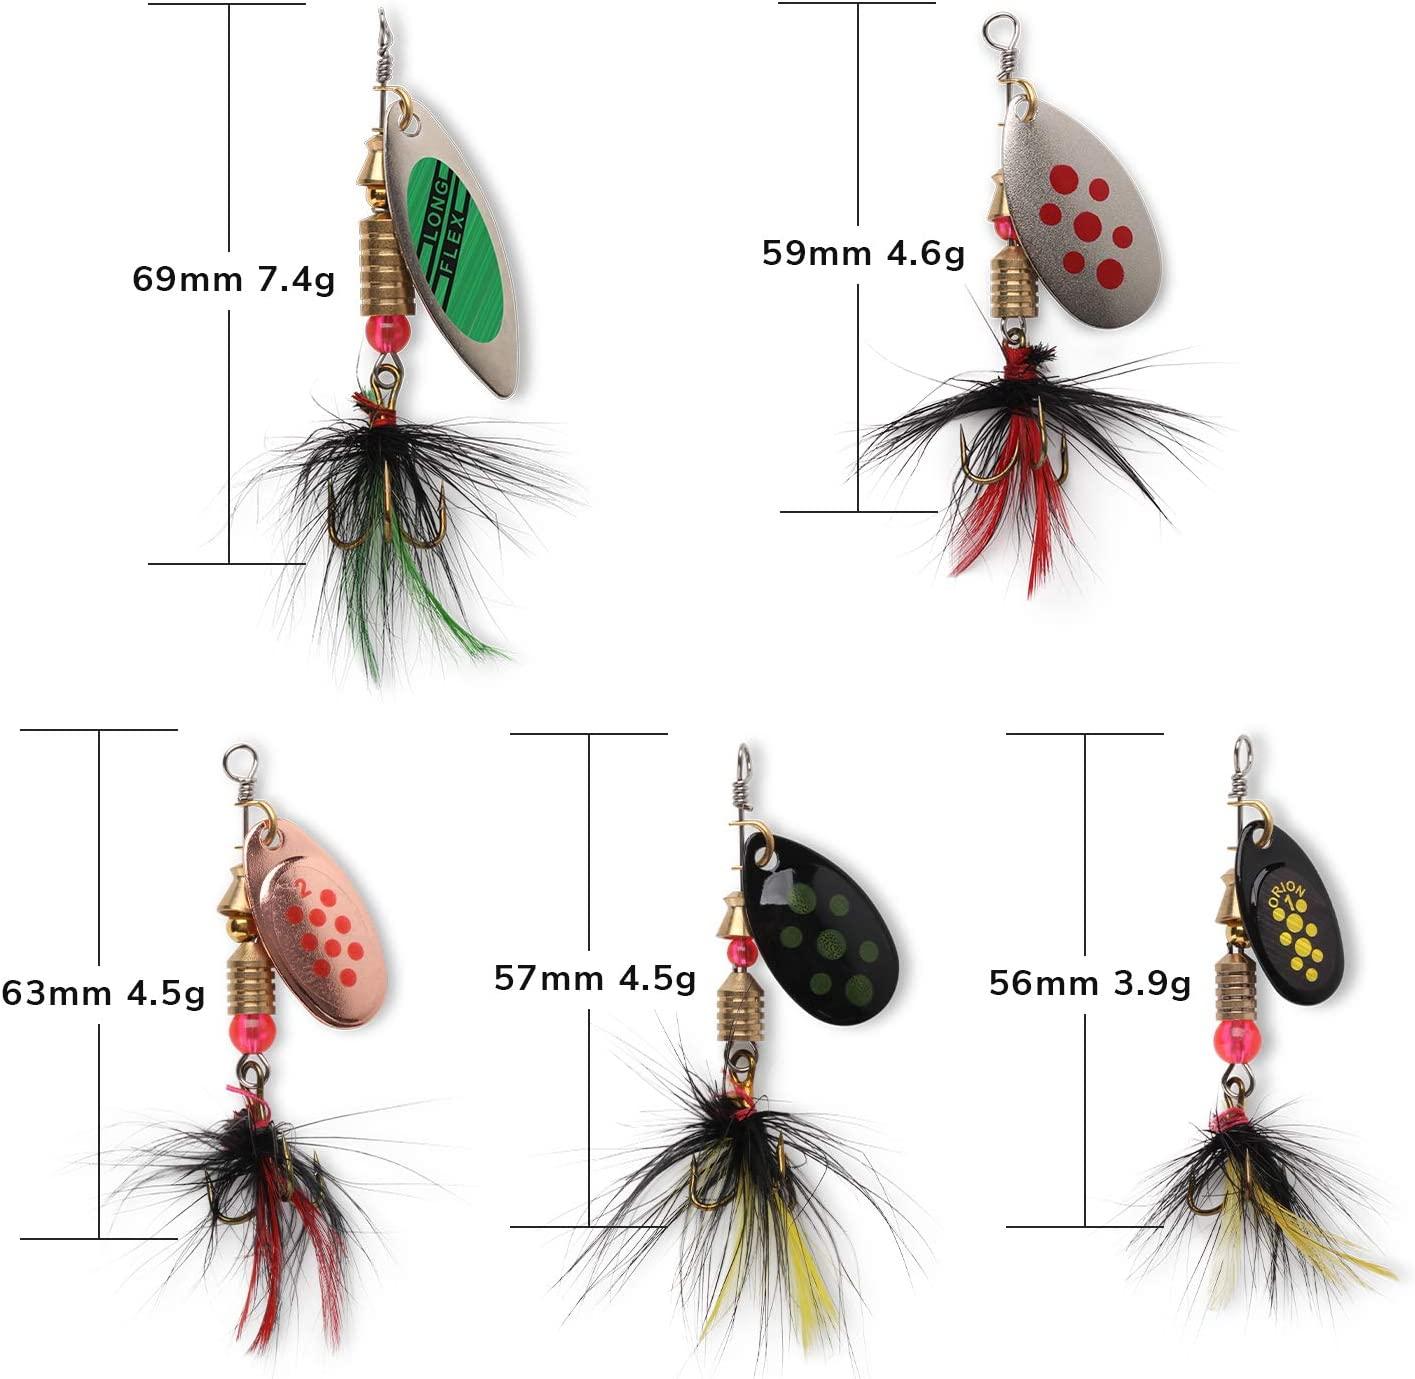 10pcs Fishing Lure , Bass Trout Salmon Hard Metal Spinner Baits Kit with 2  Tackle Boxes